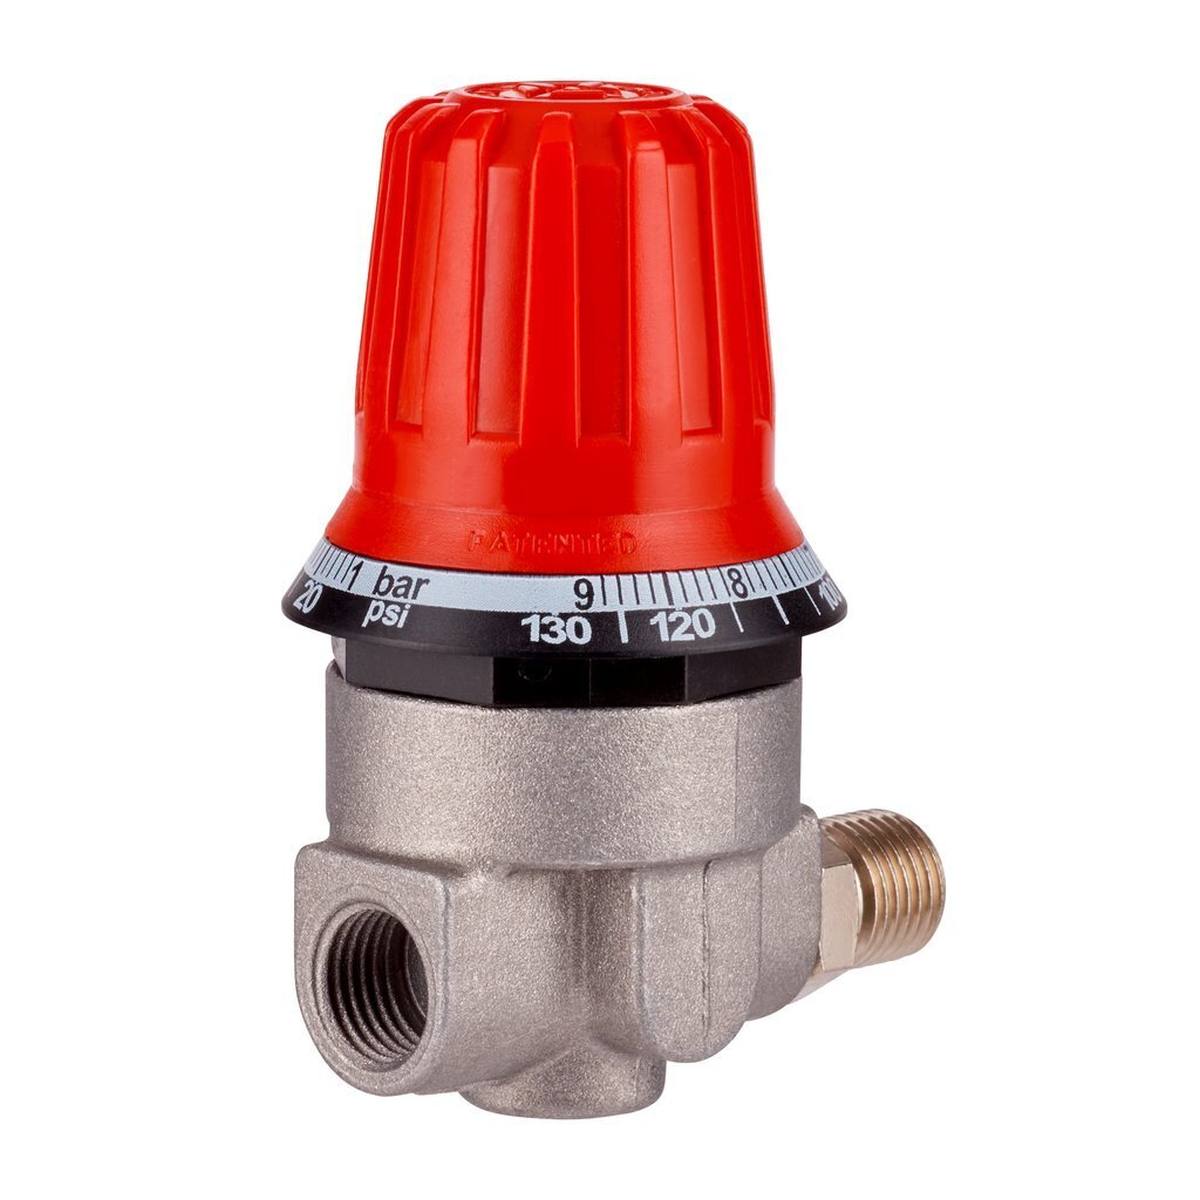 3M Compressed air regulator, recommended for universal compressed air gun